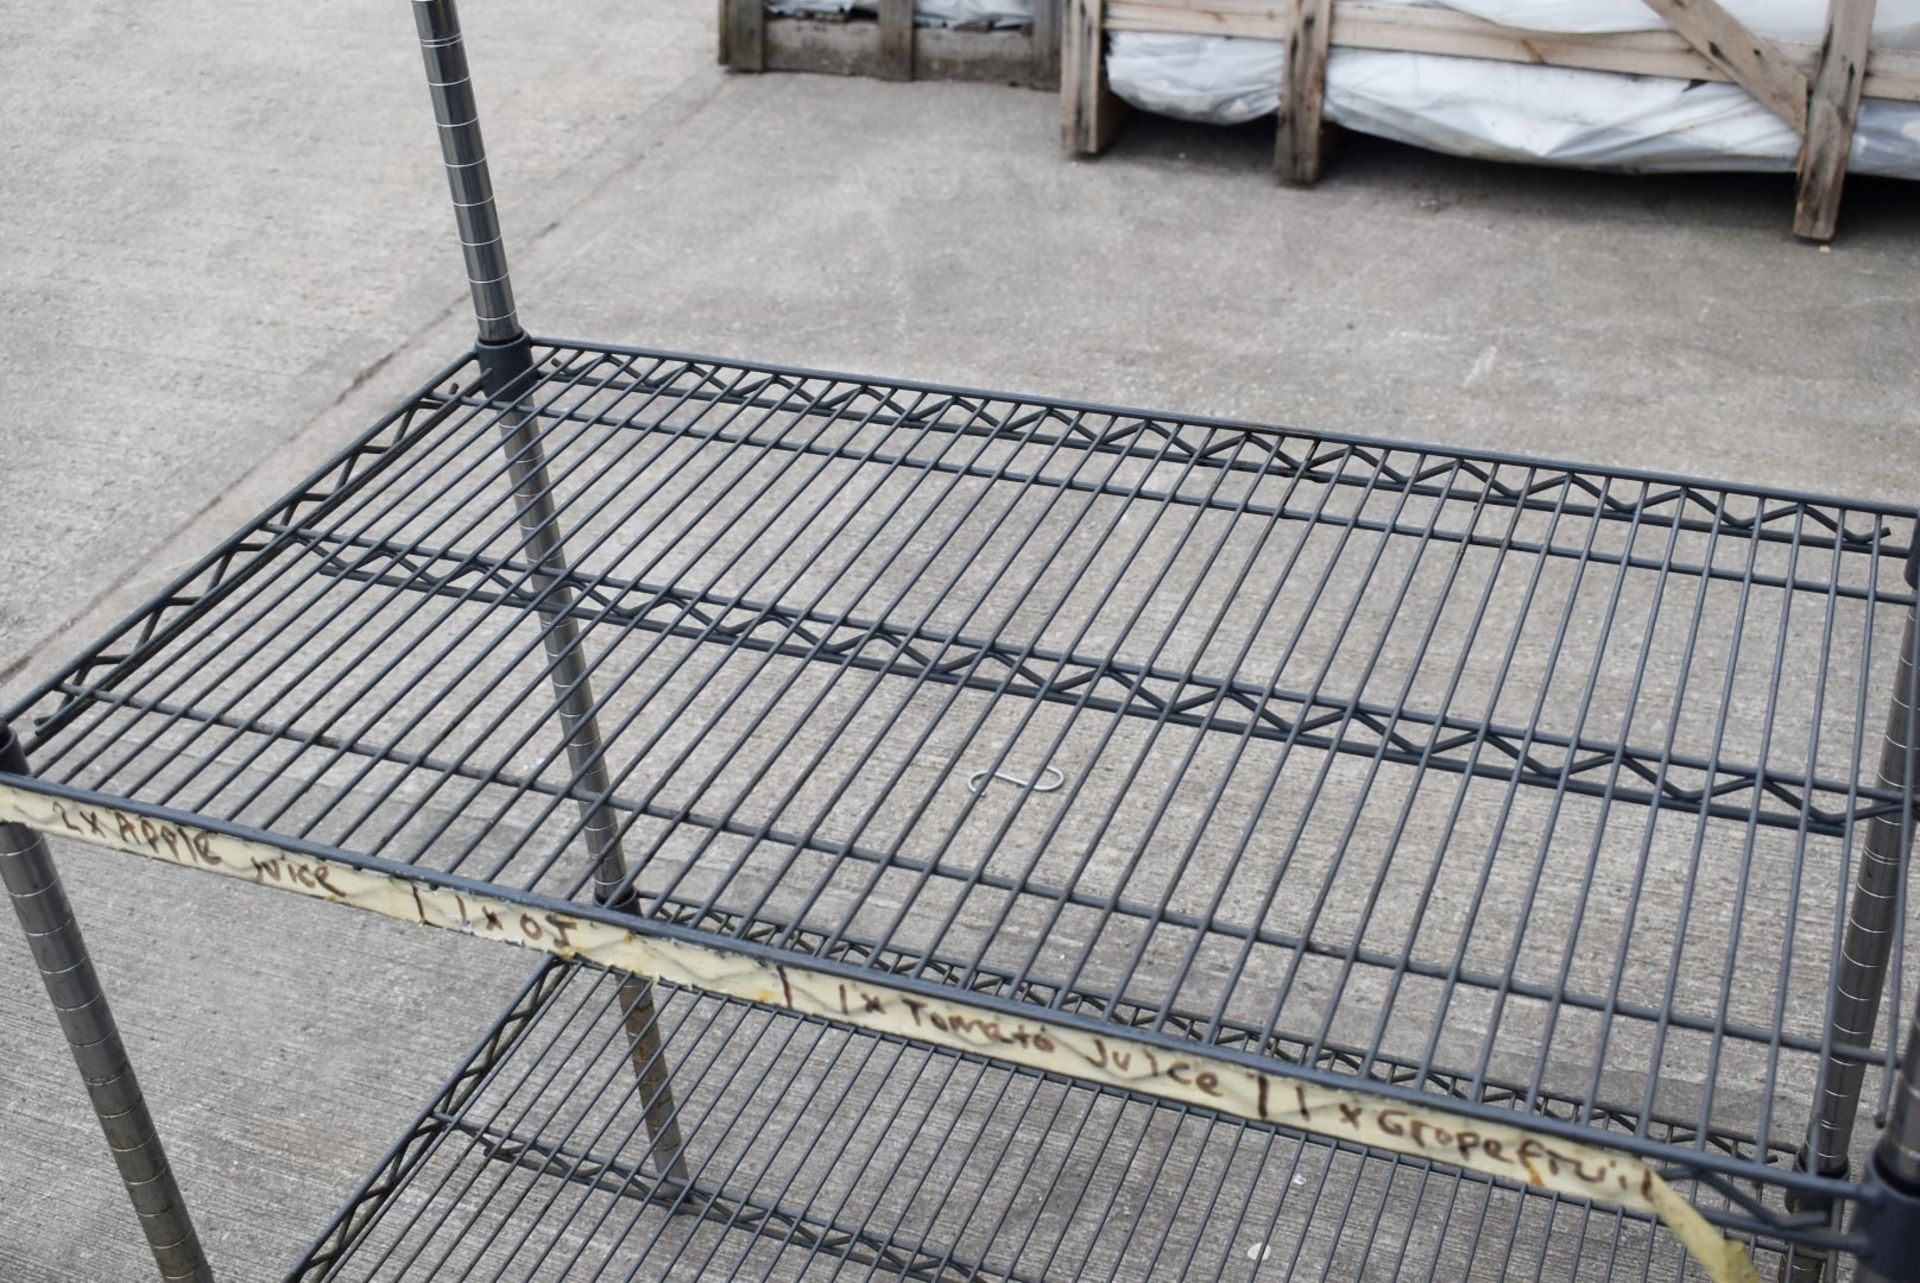 1 x Commercial Kitchen Wire Storage Shelf - Dimensions: H128x W90 x D50 cms - CL740 - Ref: - Image 4 of 5